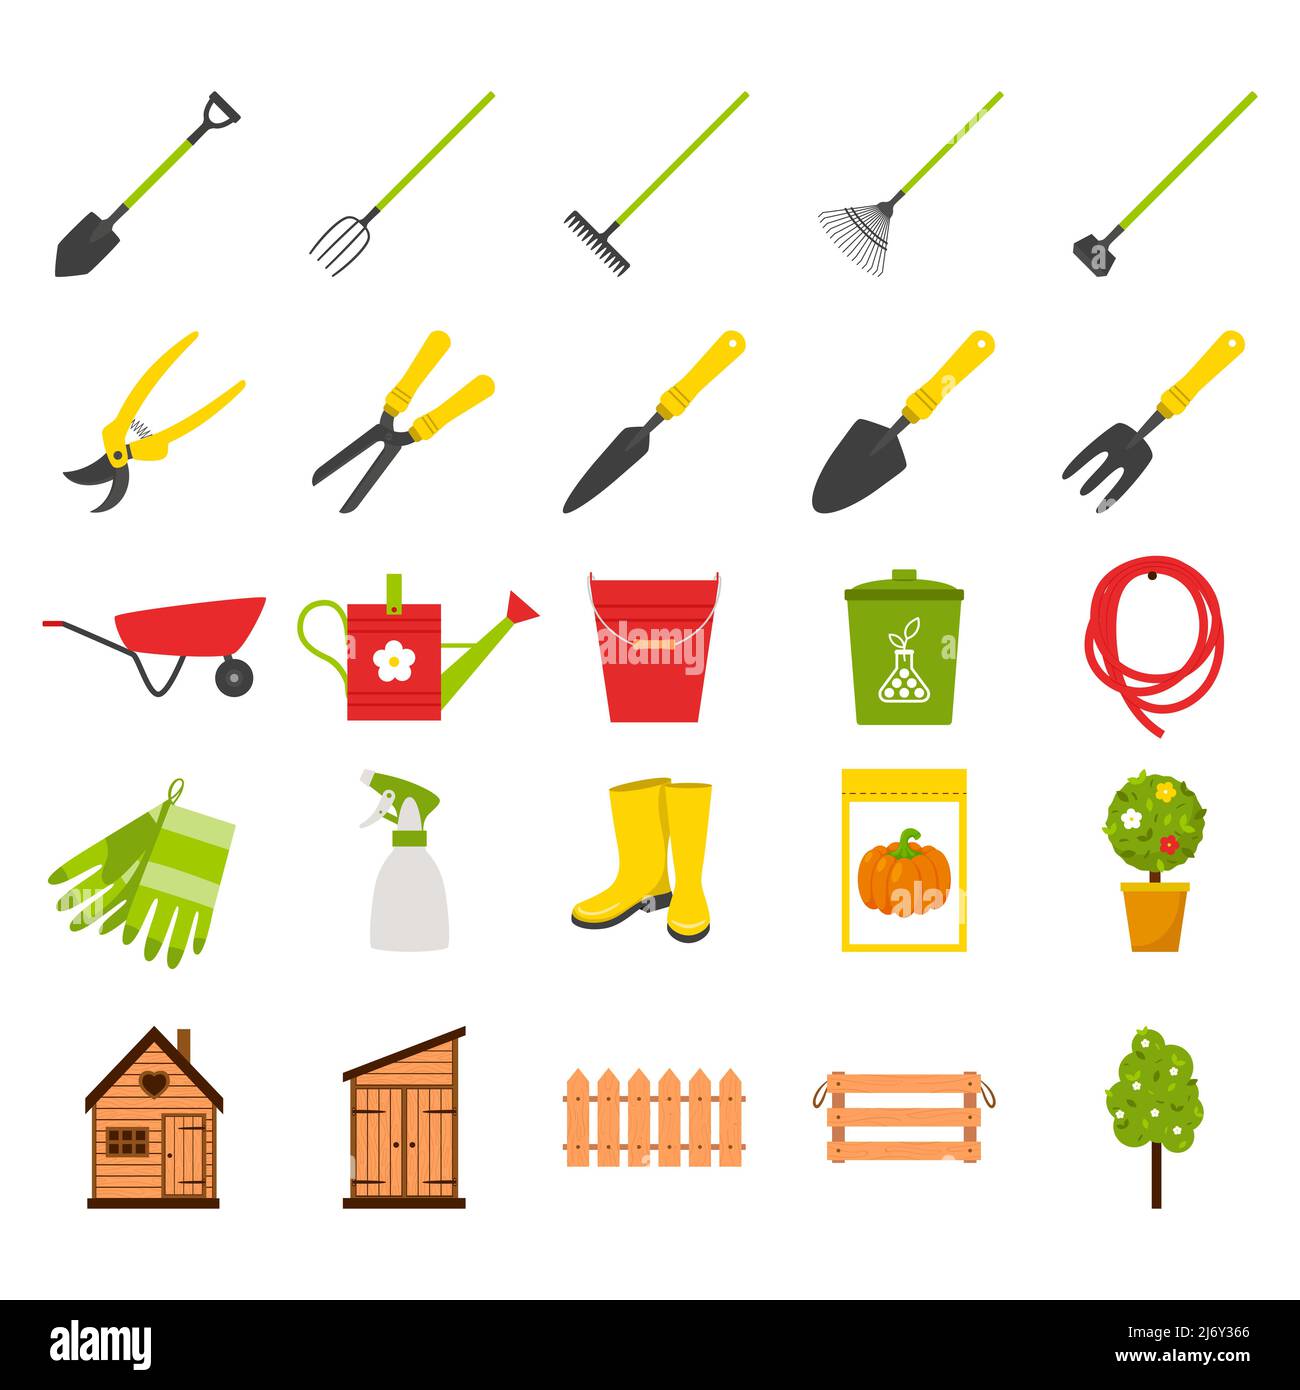 Set of icons on the theme of gardening and growing plants. Collection of rural, garden tools. Fence, box, Apple tree, seeds, fertilizers. Vector illus Stock Vector